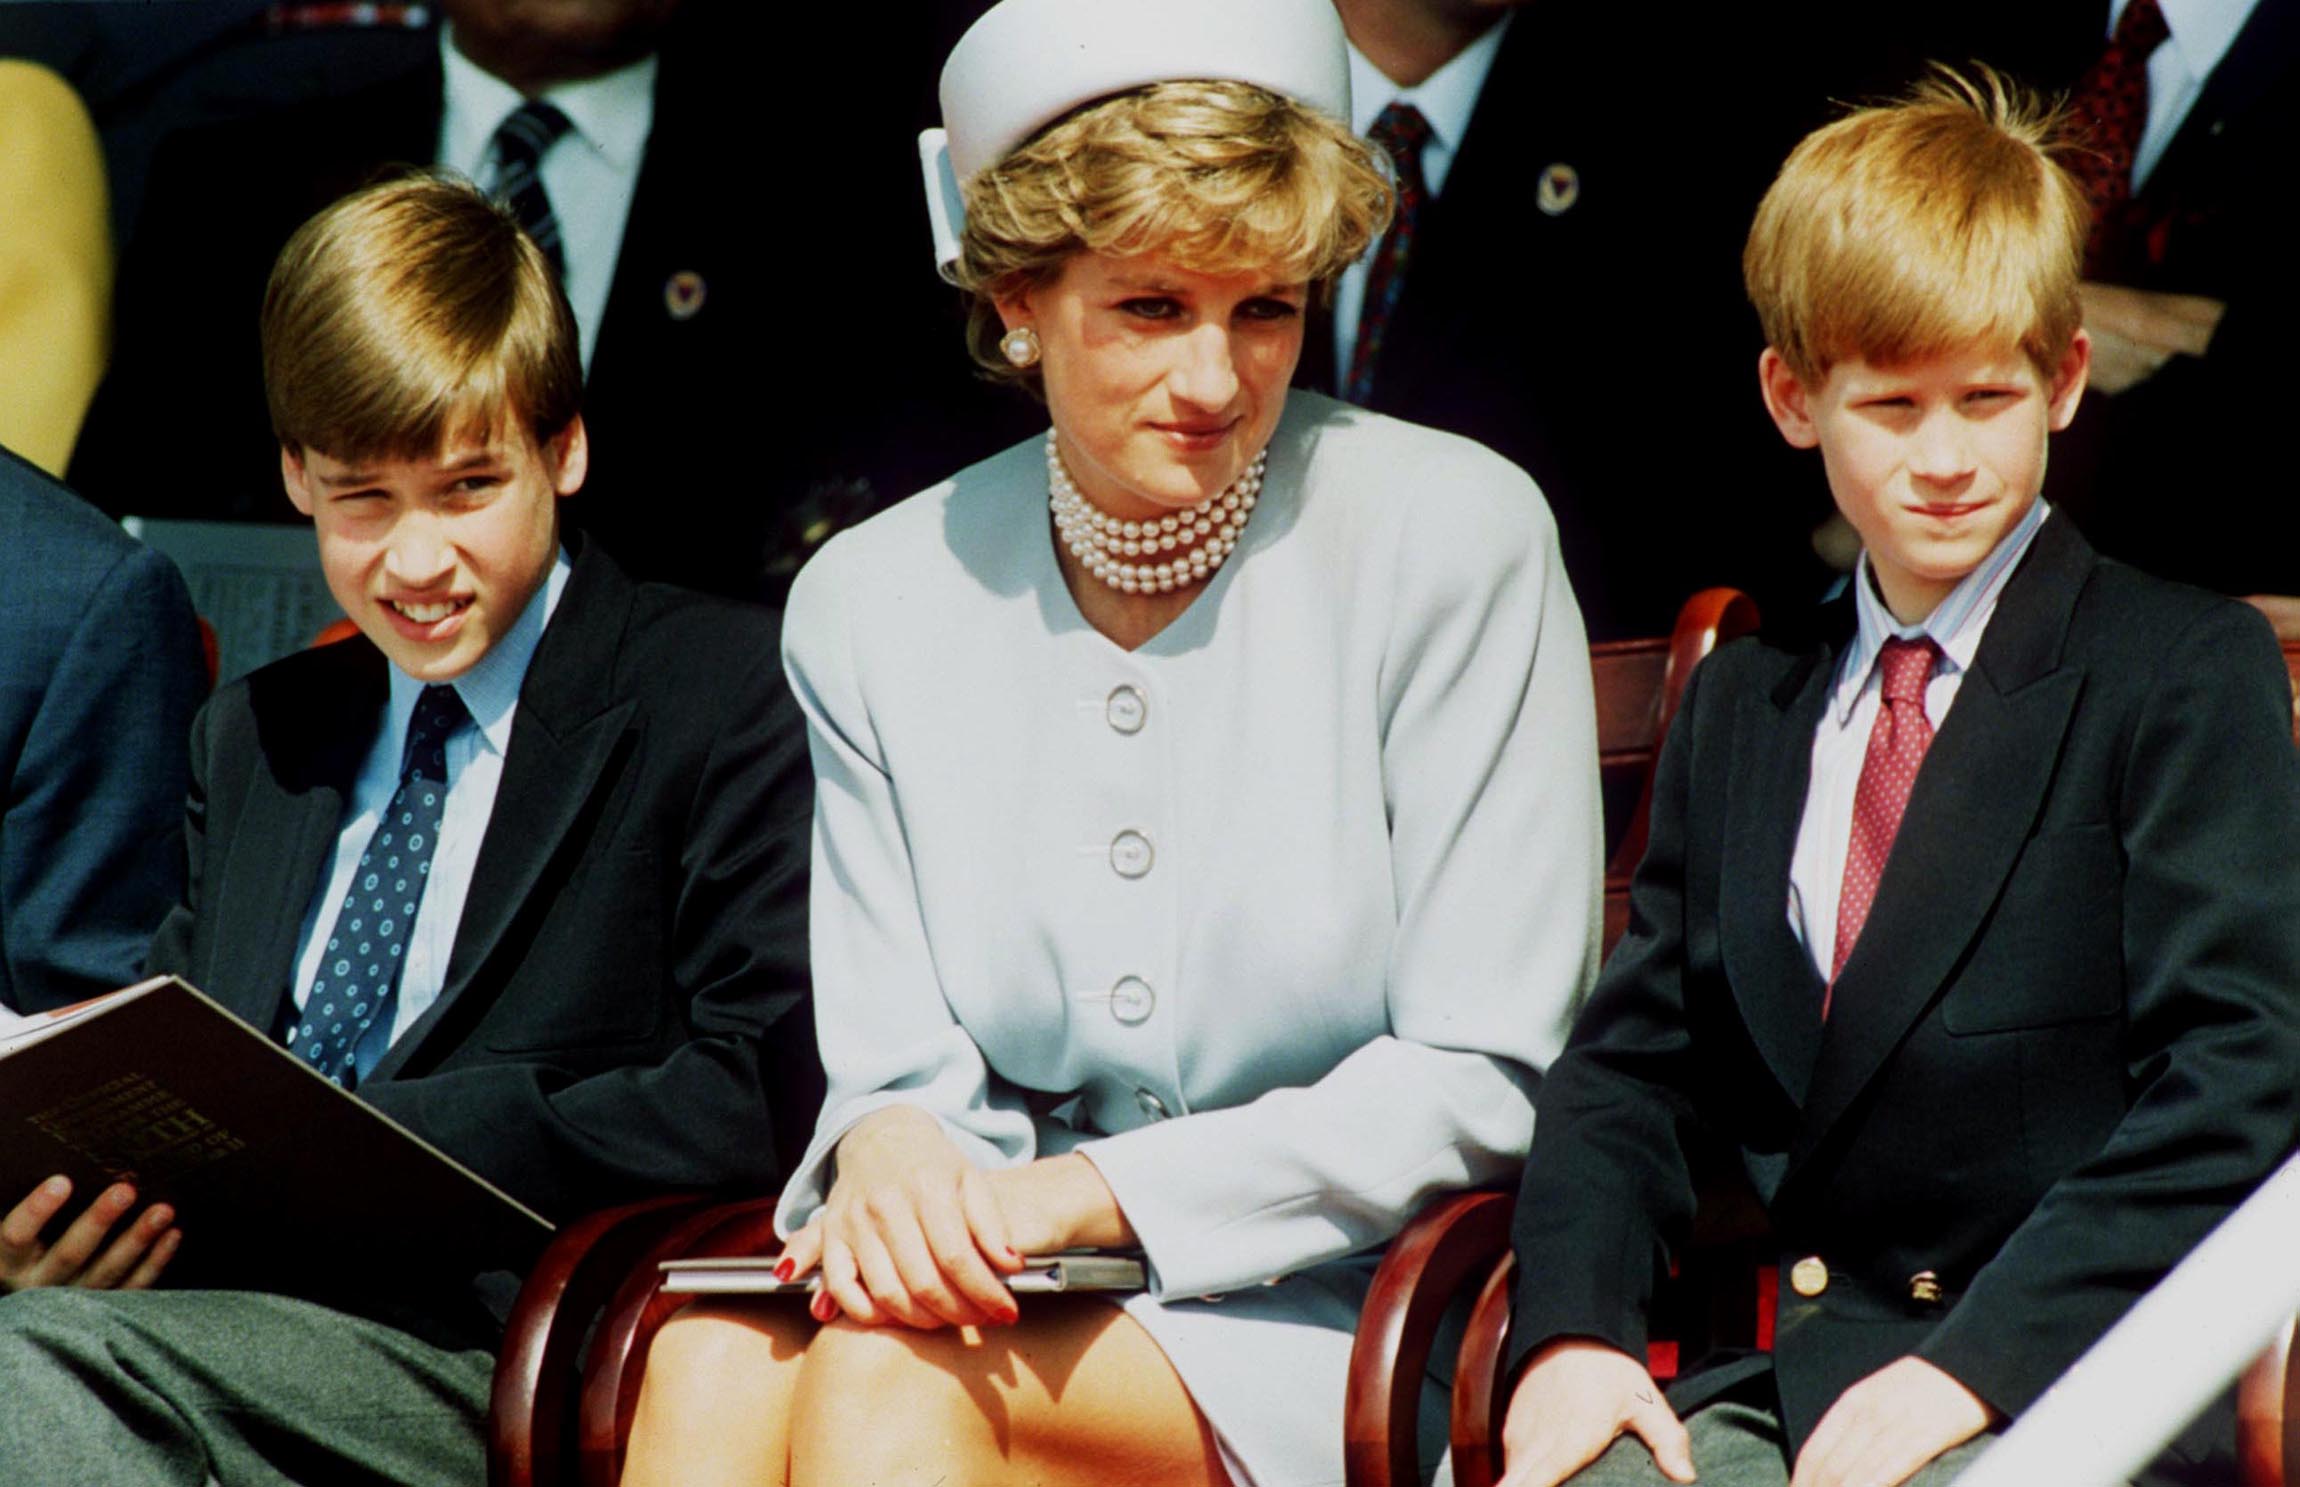 The late Princess Diana, a young Prince Charles and Prince Harry | Photo: Getty Images